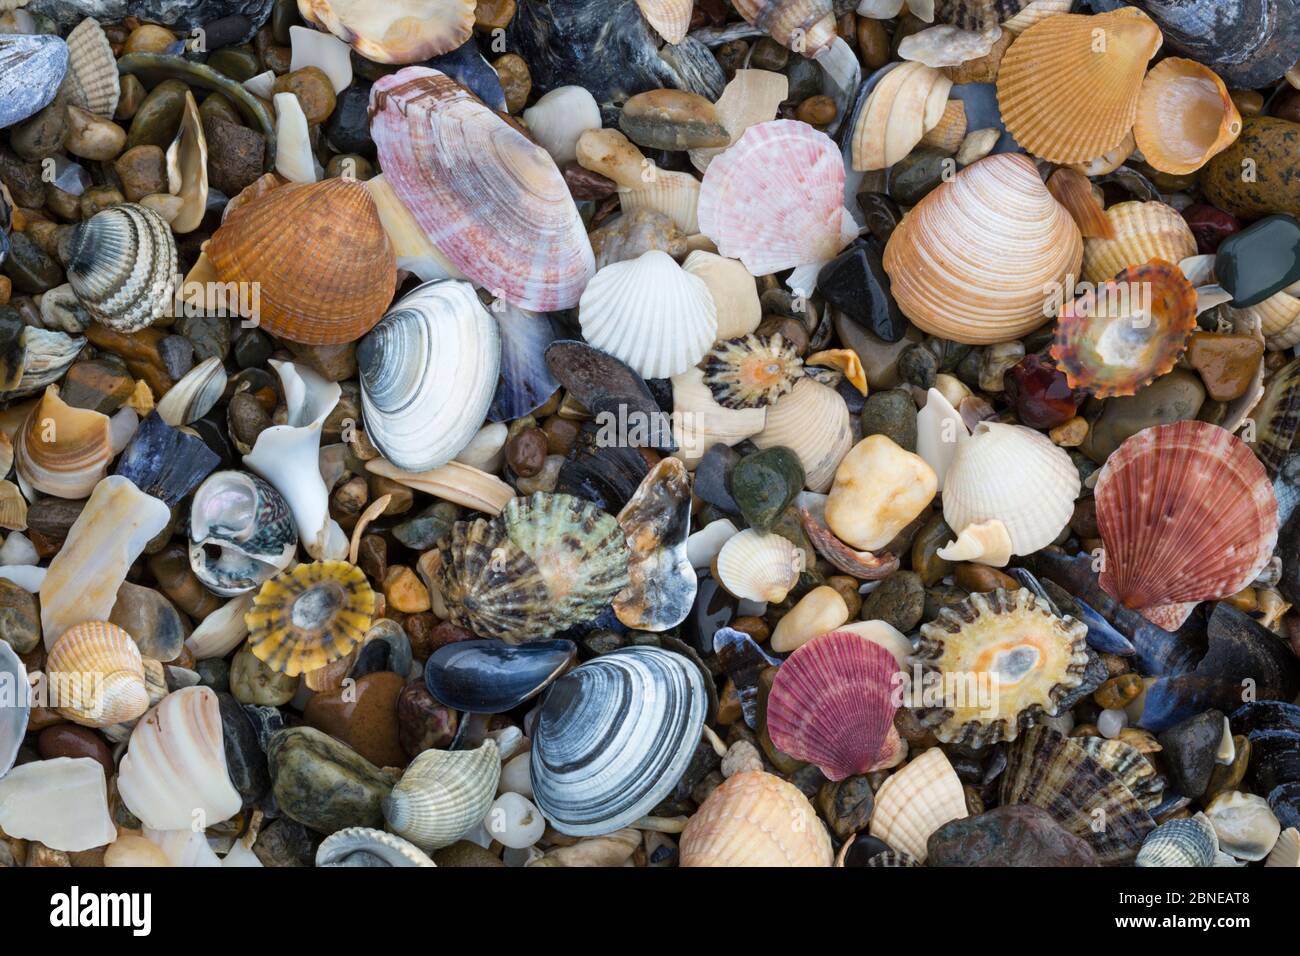 Natural accumulation of mollusc shells, mainly bivalves, washed up on the strandline, Anglesey, Wales, UK. December. Stock Photo